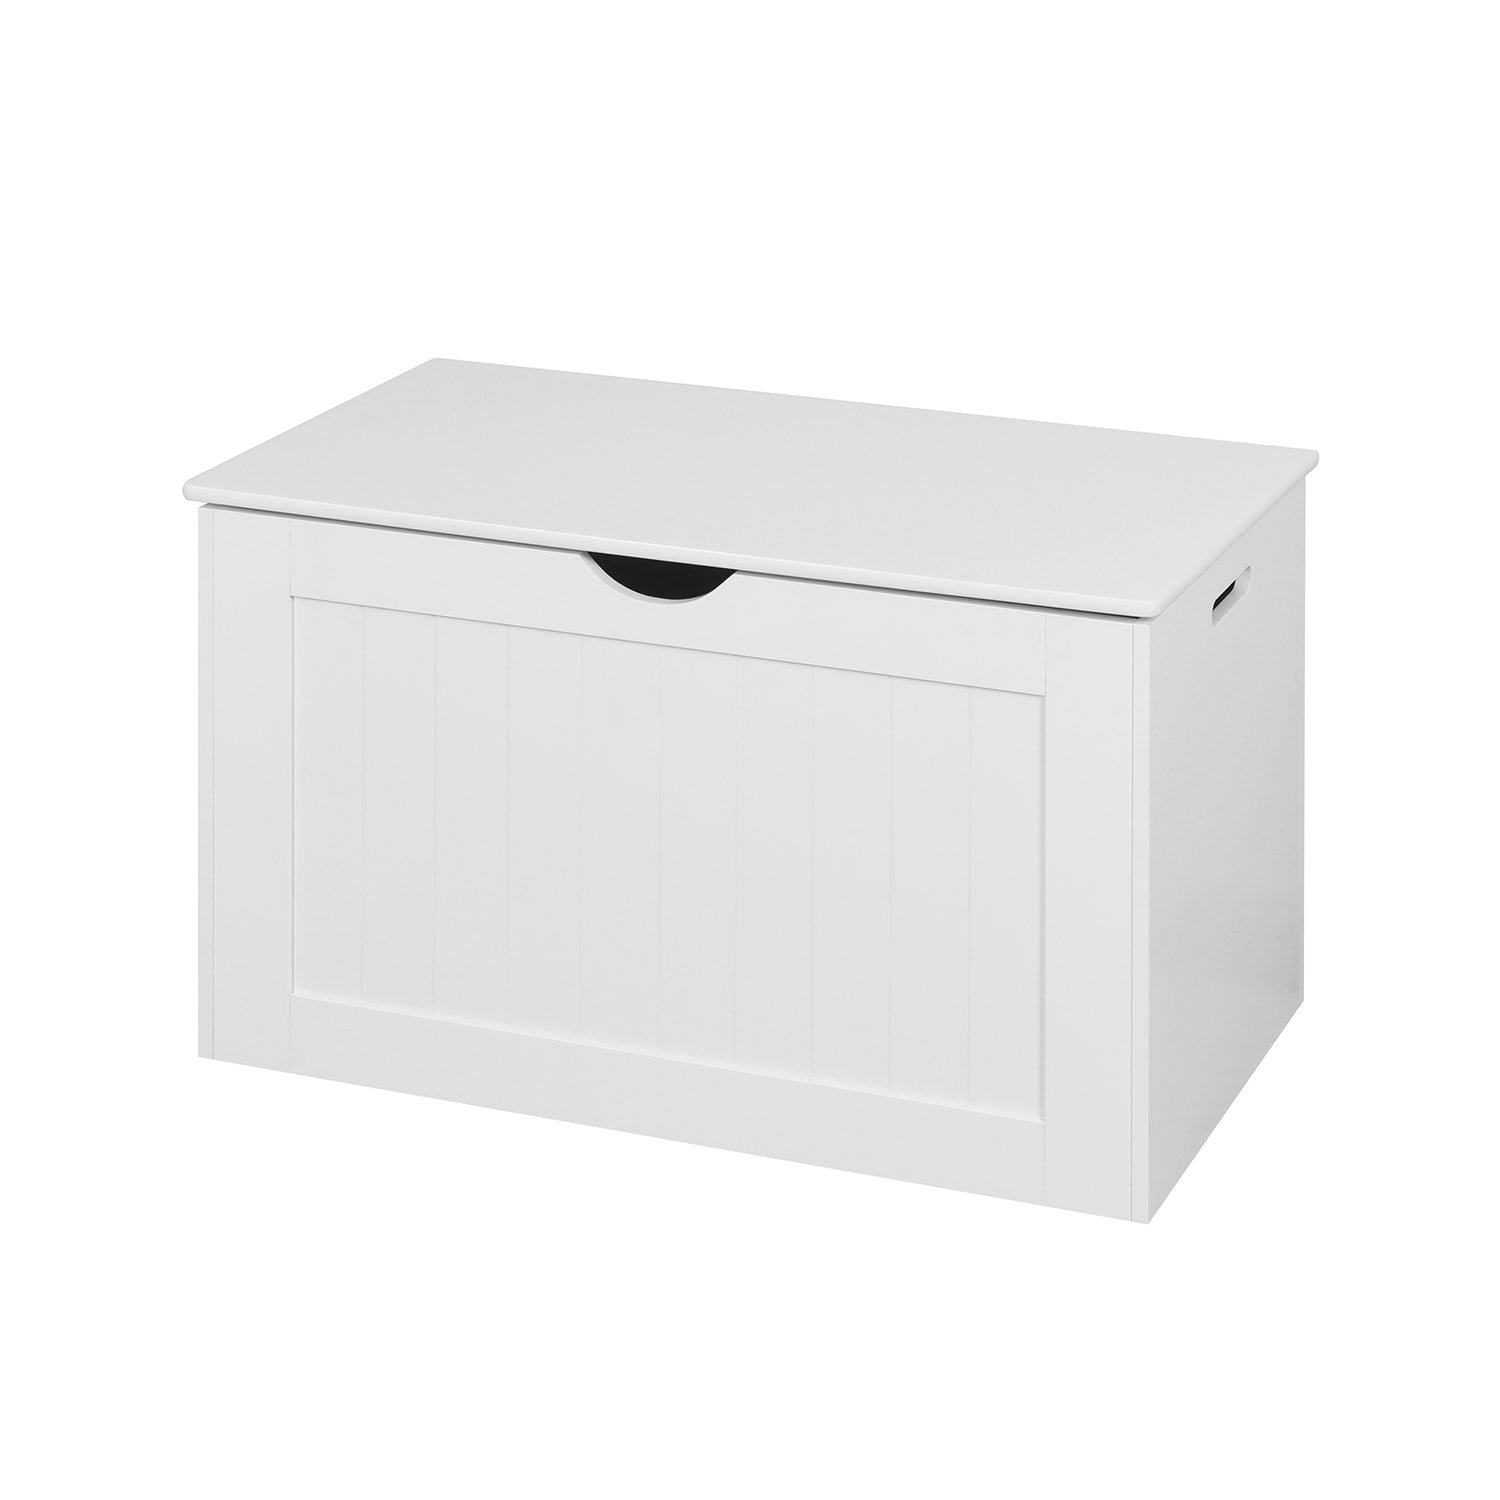 GZMR Wooden Toy Box White Rectangular Toy Box in the Toy Boxes